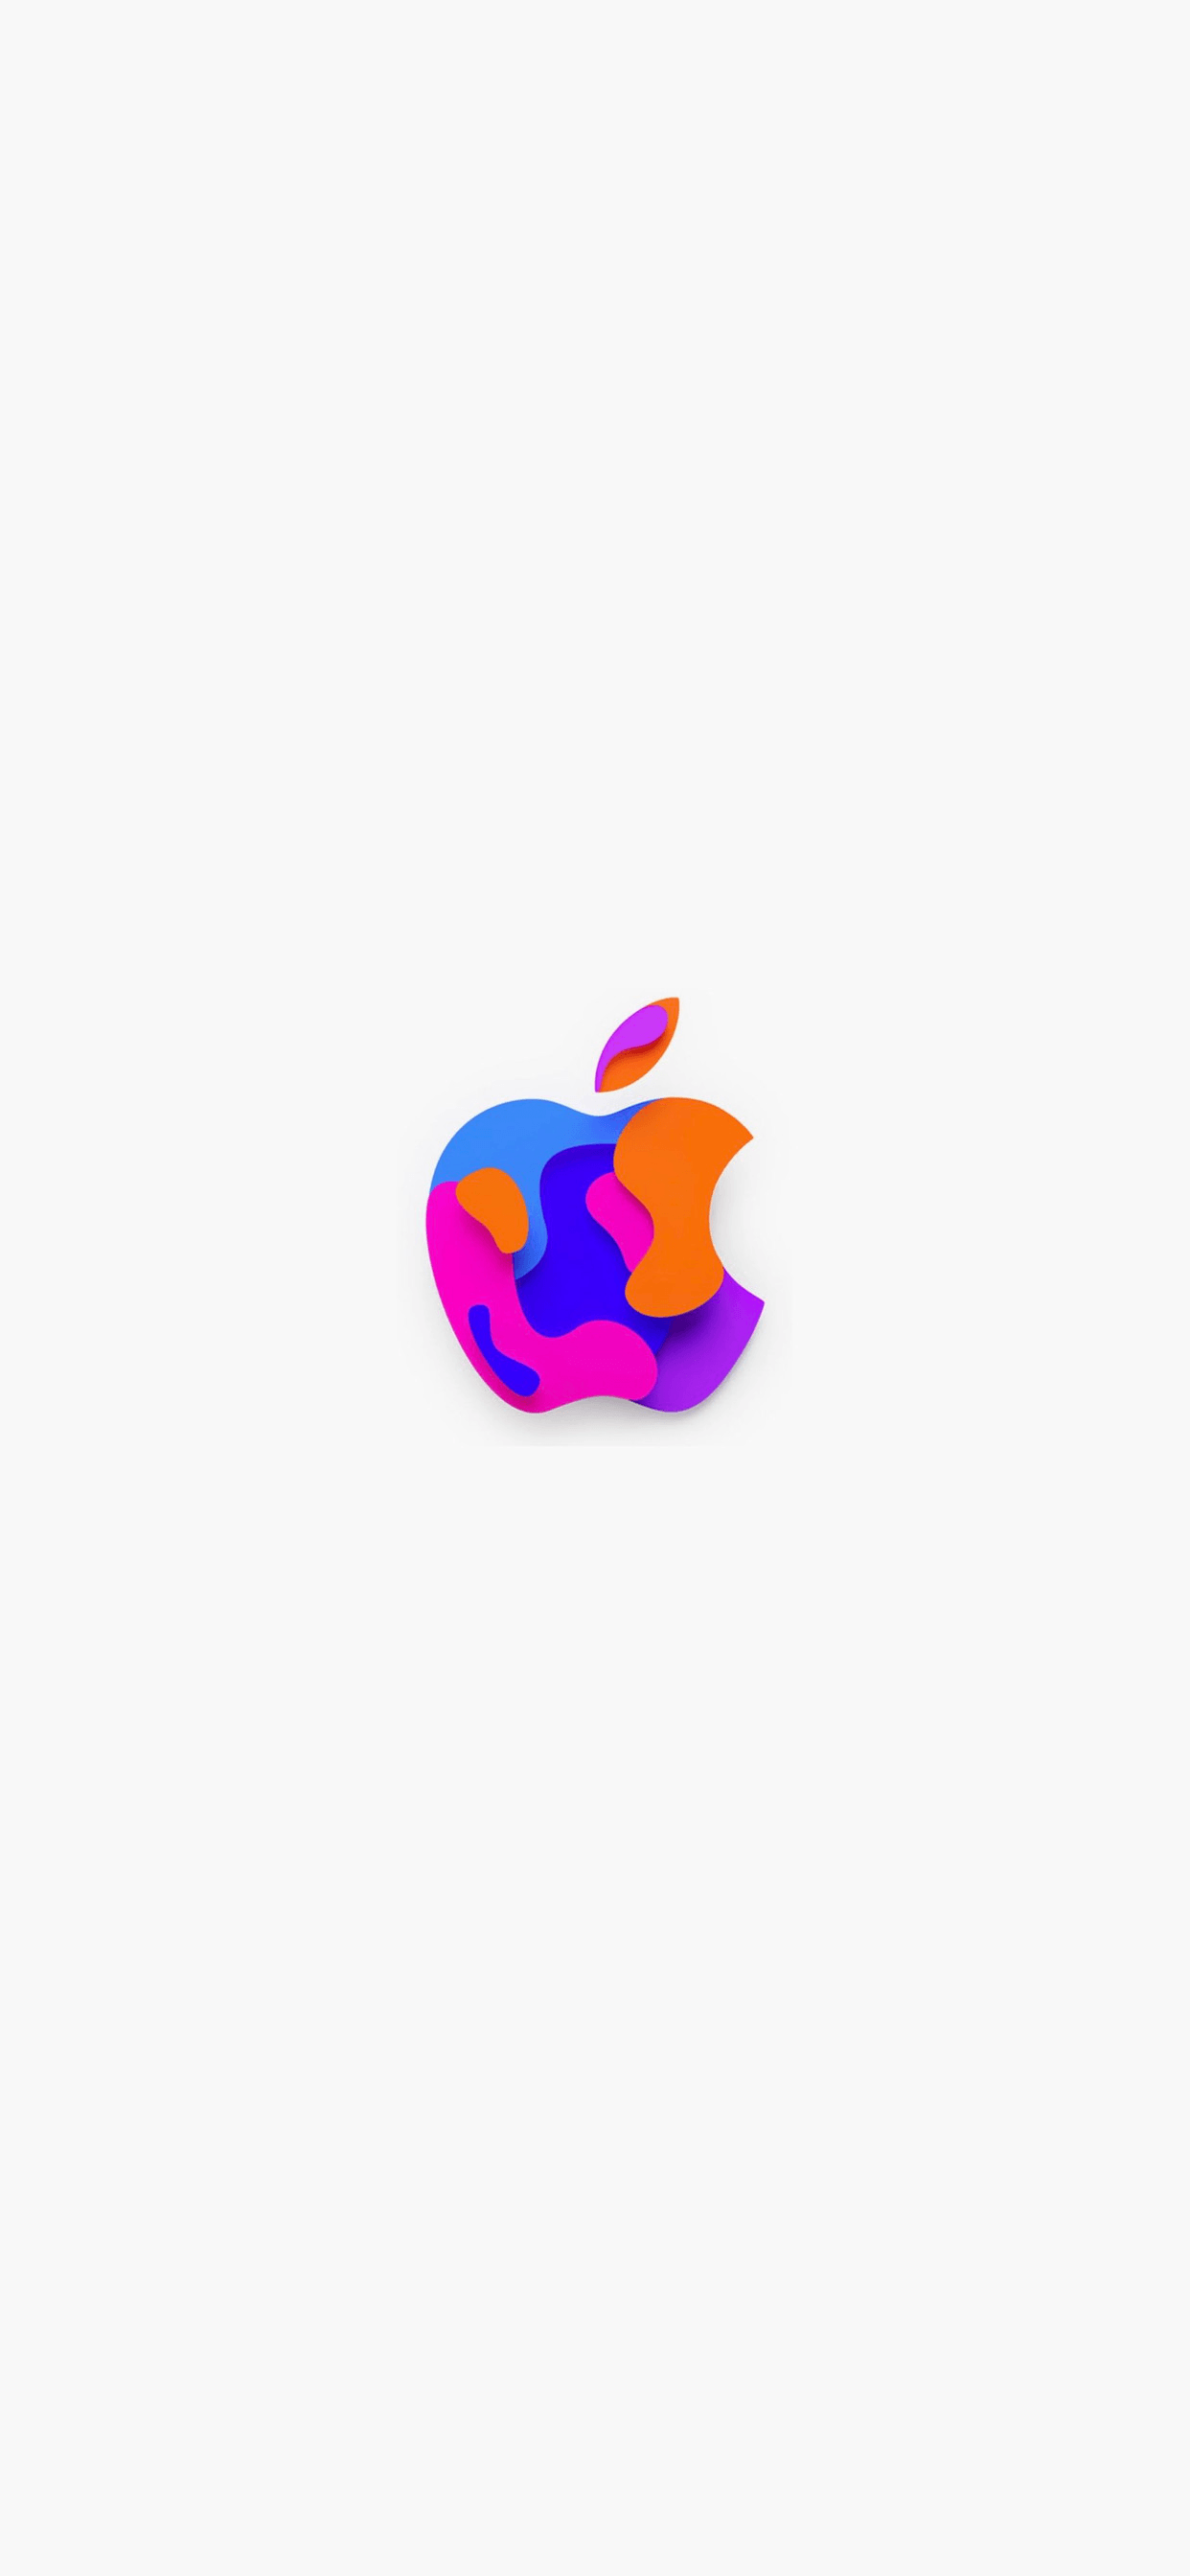 2018 Apple Logo - There's more in the making: 33 Apple logo wallpapers